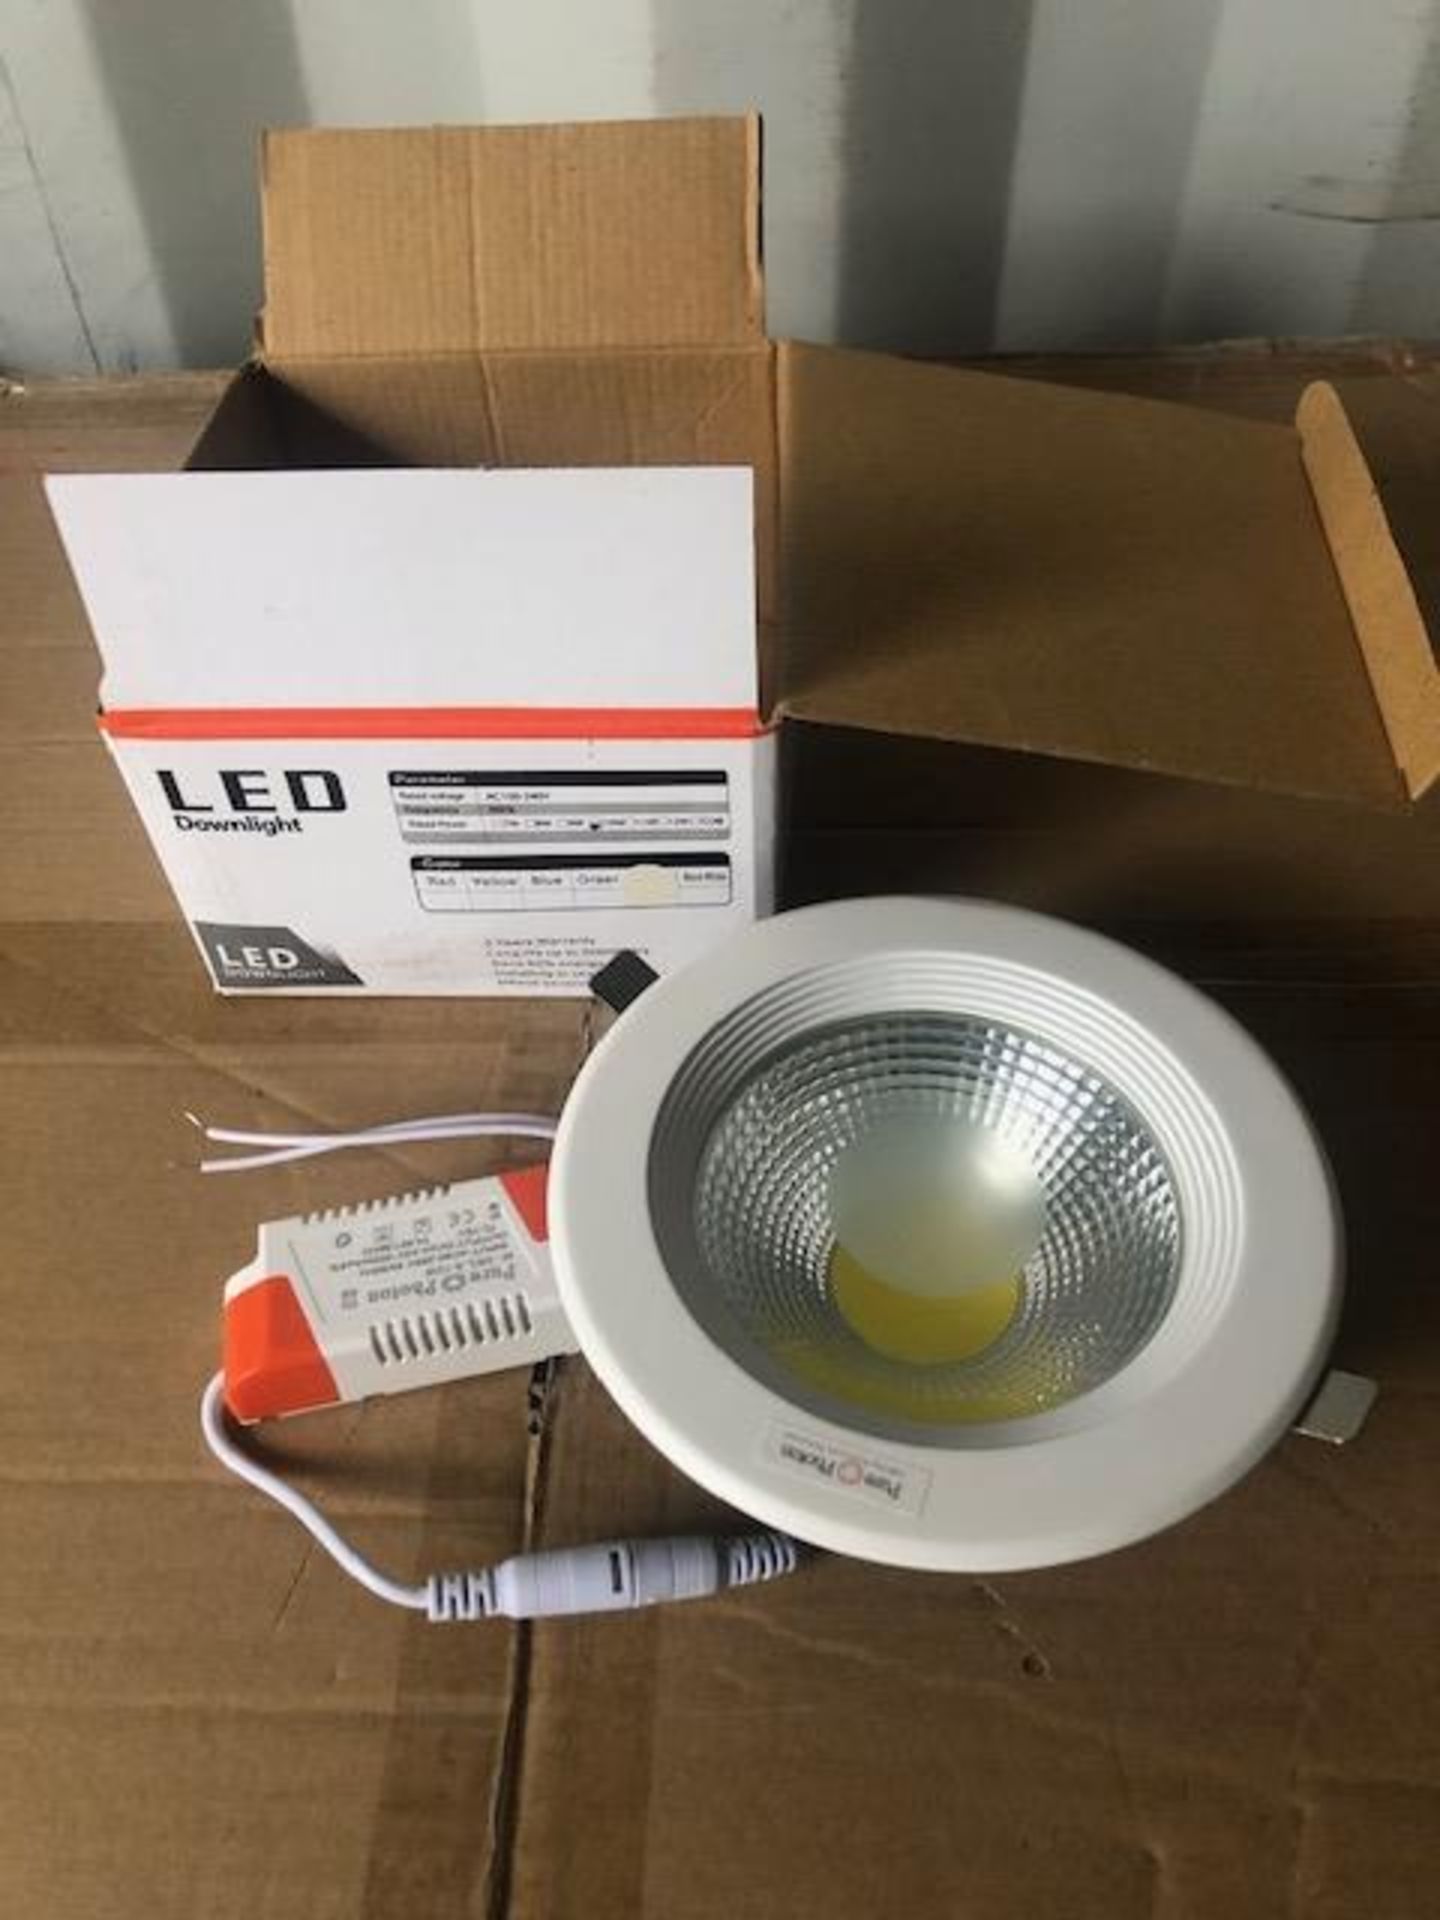 LED 10W COB 60mm Recessed Downlight 550 - Image 2 of 2